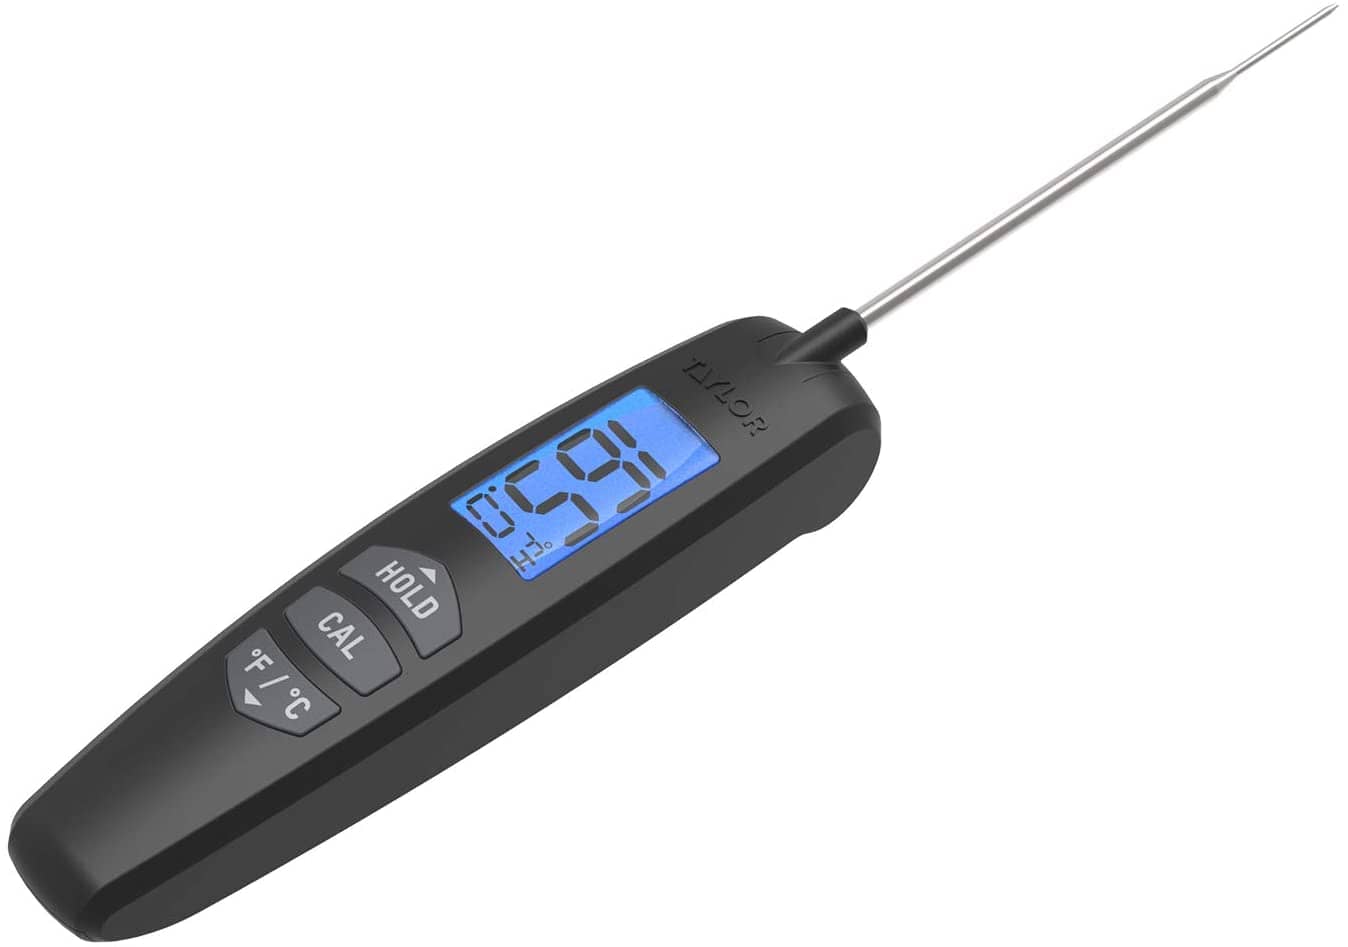 https://cdn.shopify.com/s/files/1/0473/5398/7229/products/taylor-taylor-turbo-read-thermocouple-thermometer-077784986714-19593287893152_2000x.jpg?v=1626103913